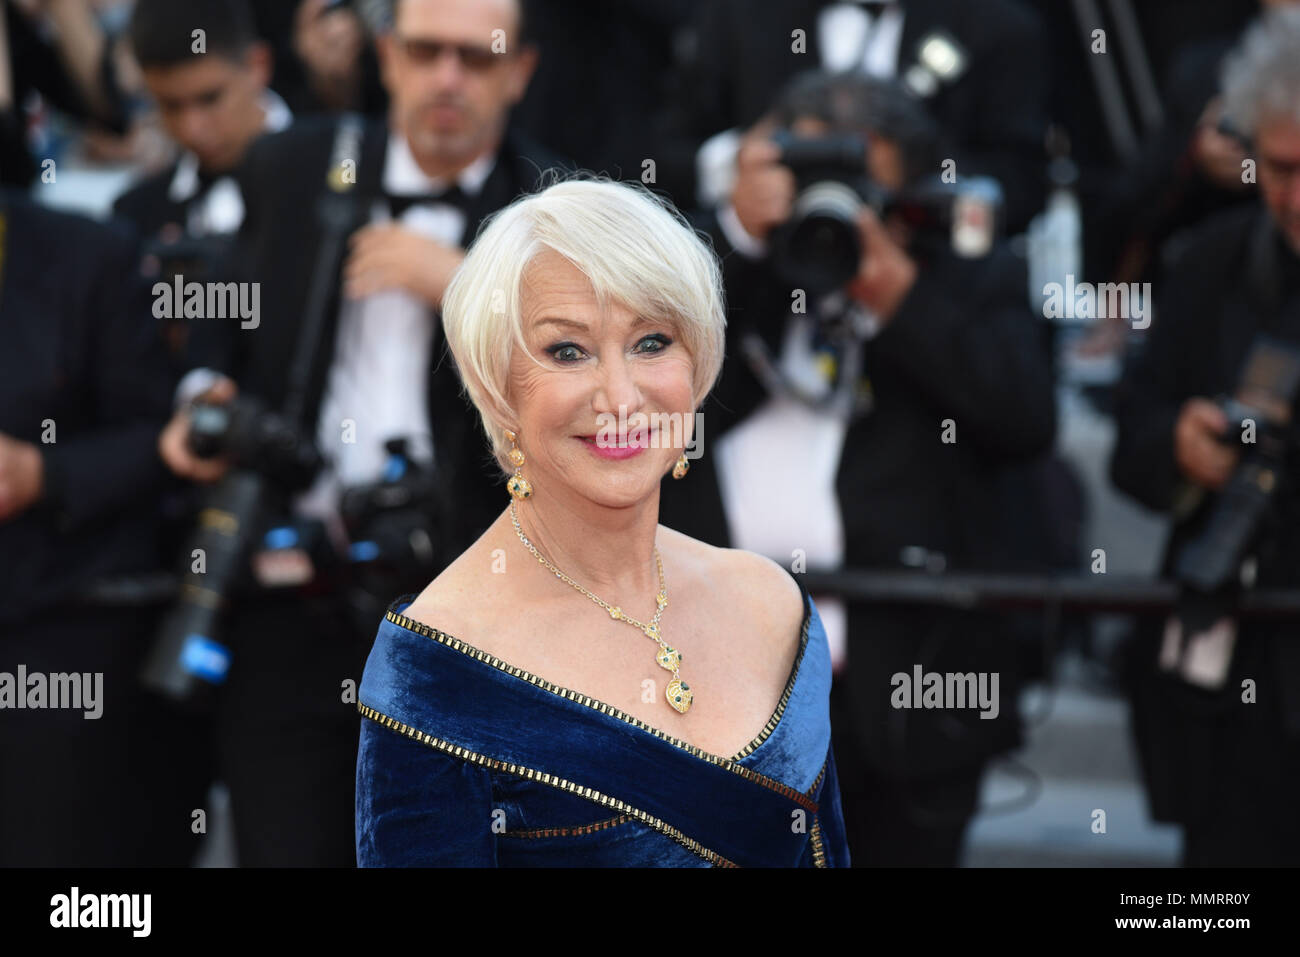 May 12, 2018 - Cannes, France: Helen Mirren attends the 'Girls of The Sun' premiere during the 71st Cannes film festival. Credit: Idealink Photography/Alamy Live News Stock Photo